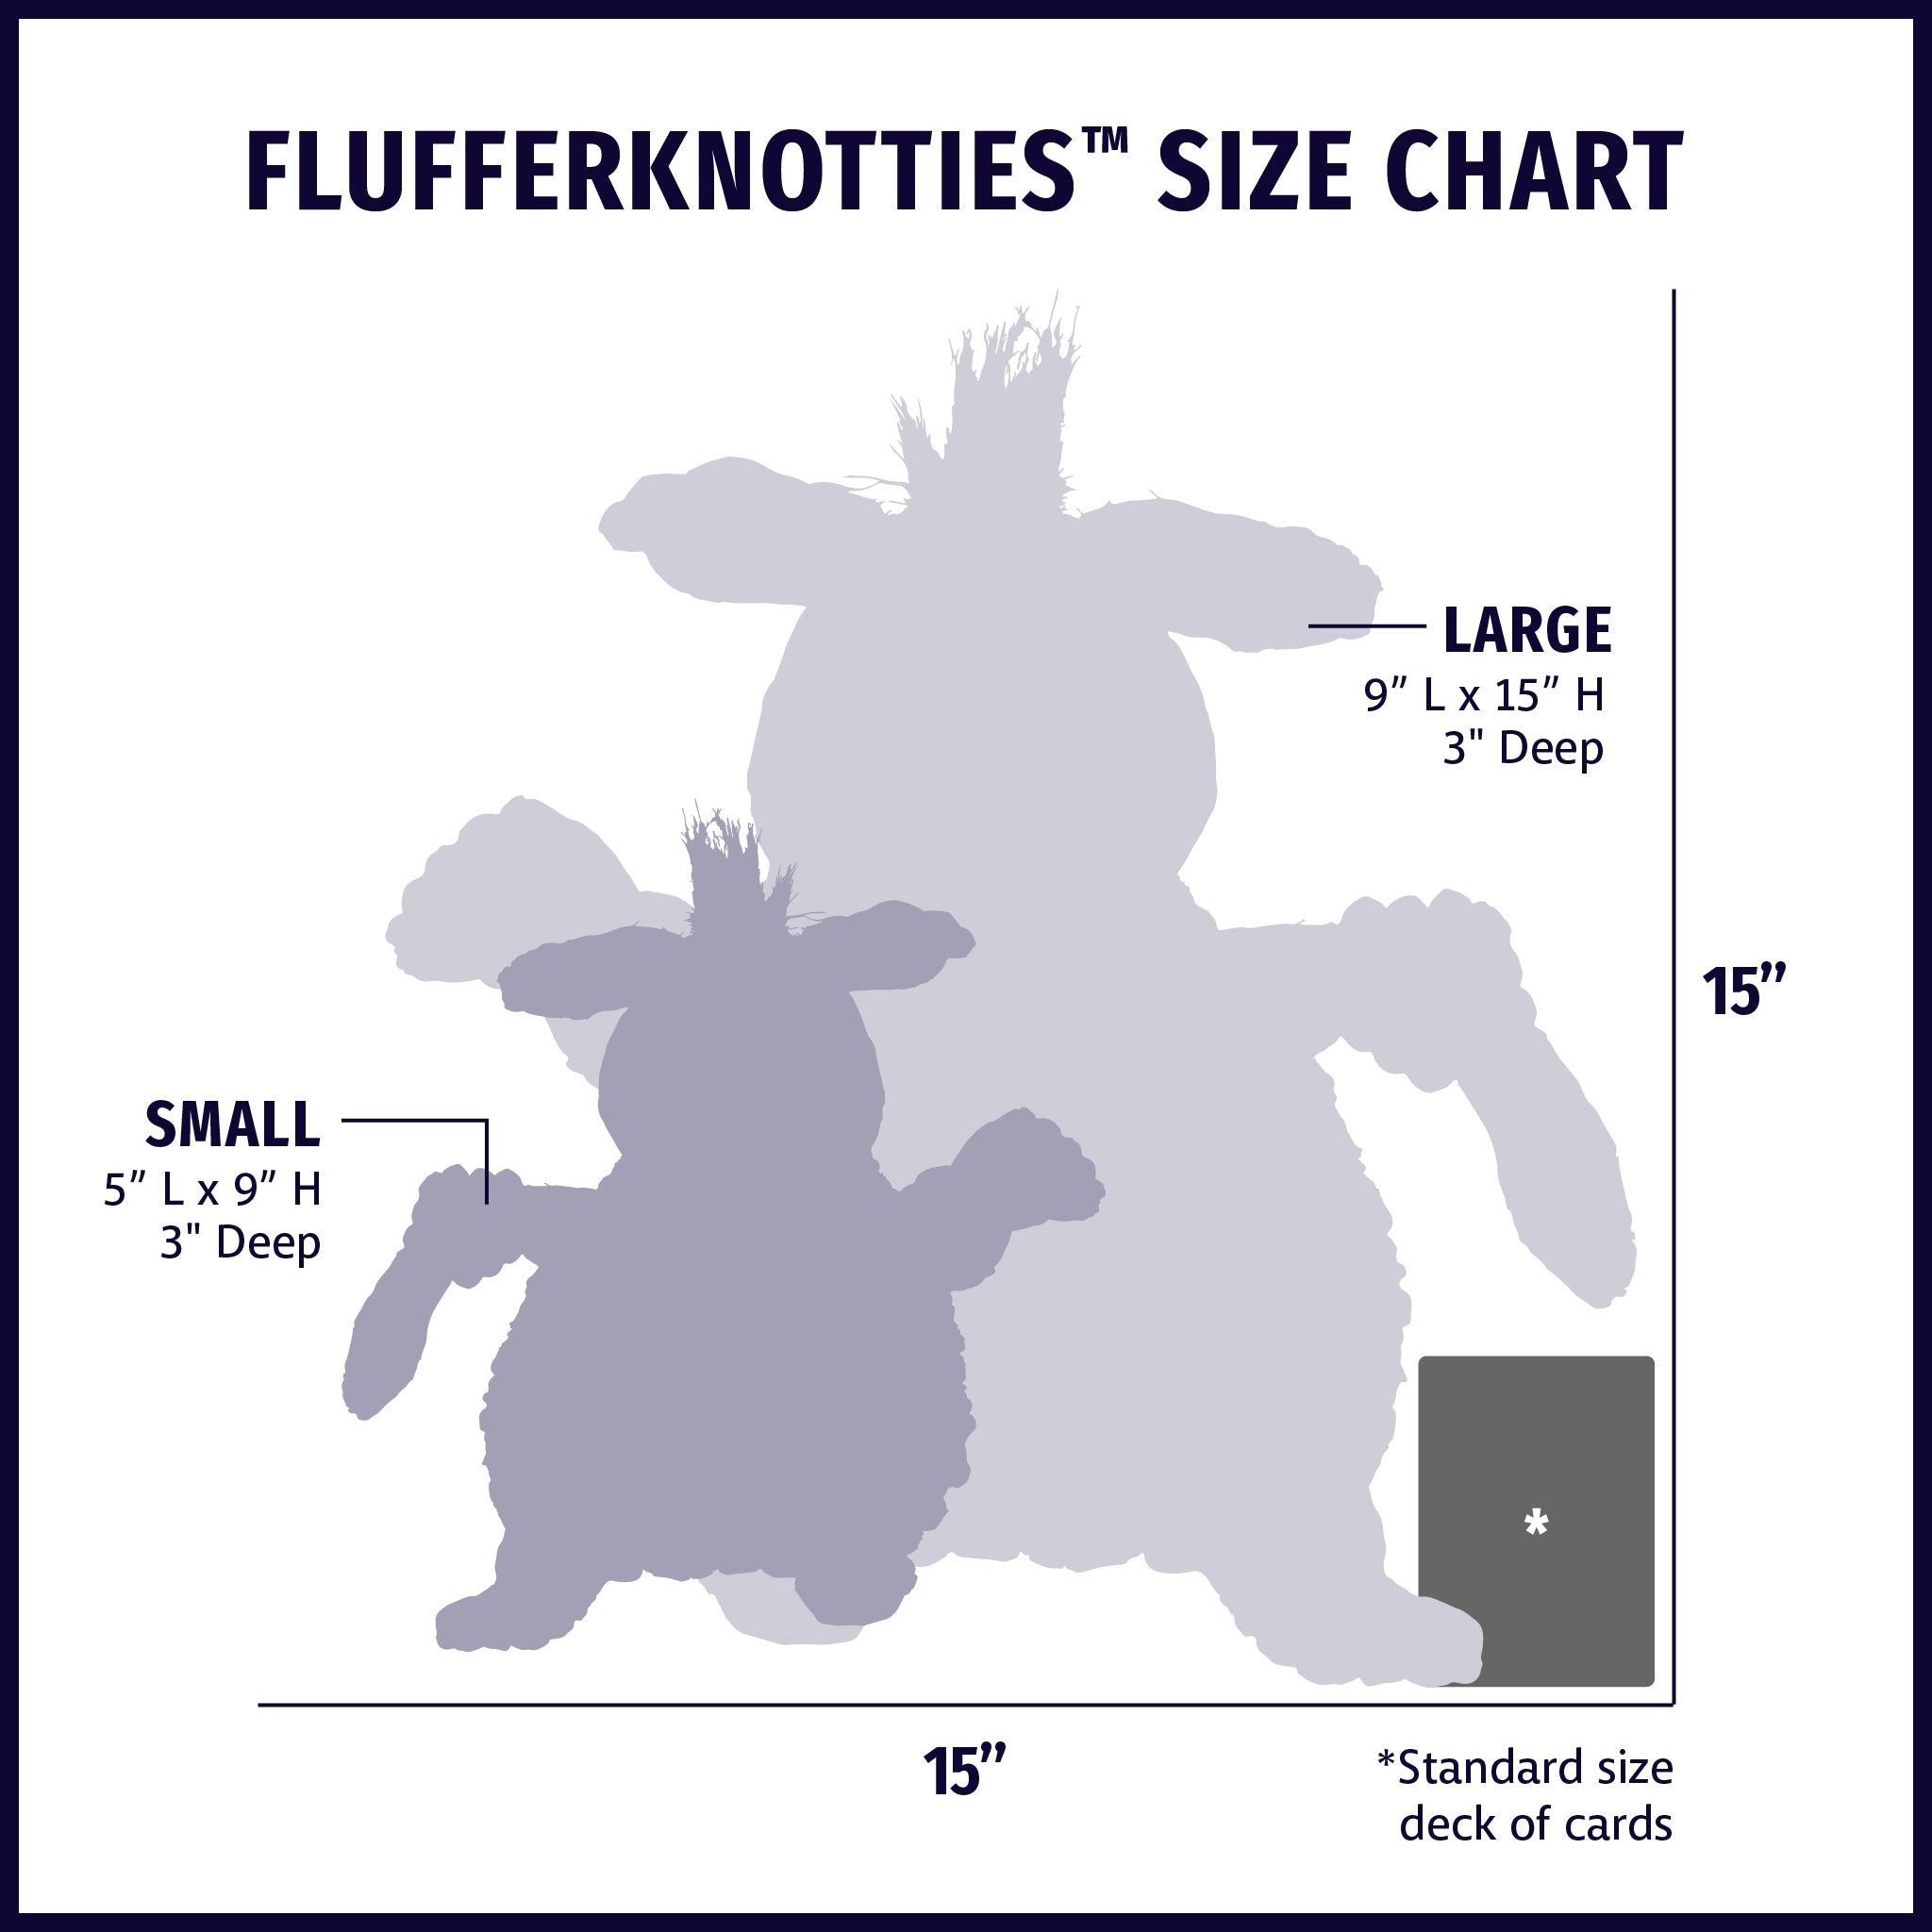 Size chart displaying FlufferKnottie™ plush dog toy silhouettes in small and large with approximate dimensions of each size compared to standard size deck of cards.